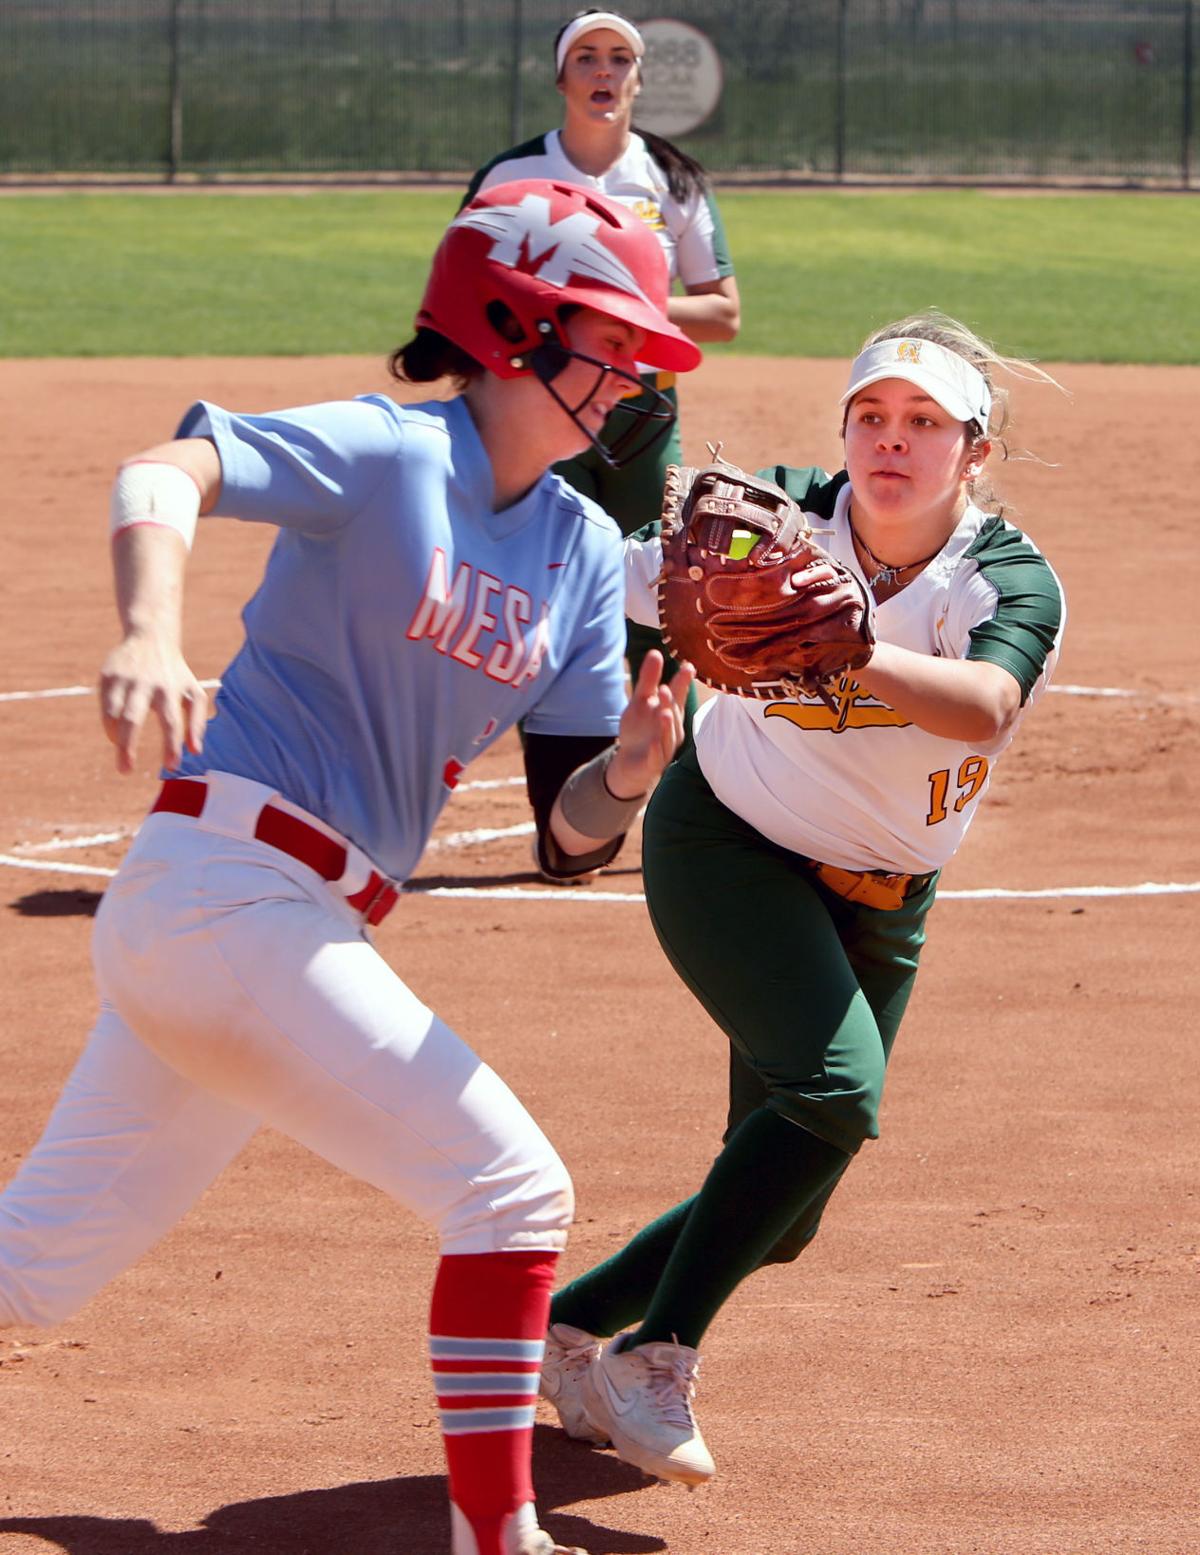 Evelyn Roman with the tag-out at first base Saturday against MCC